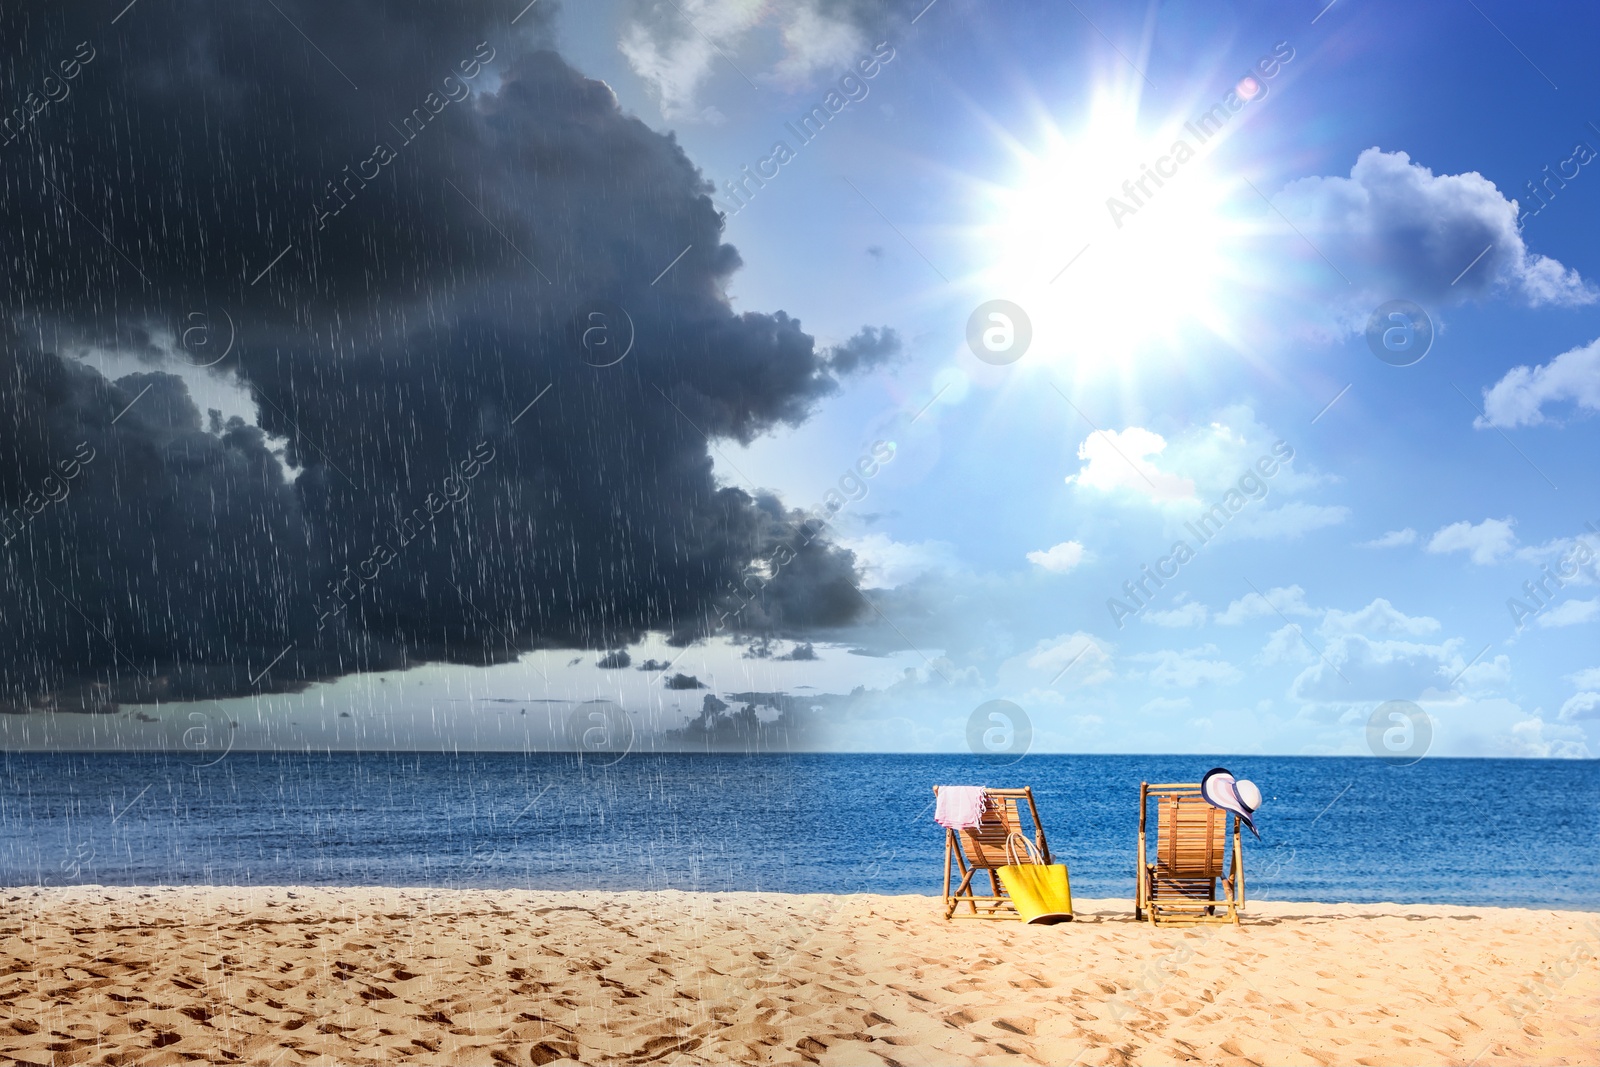 Image of Sea beach under pouring rain and on sunny day, collage. Weather changes